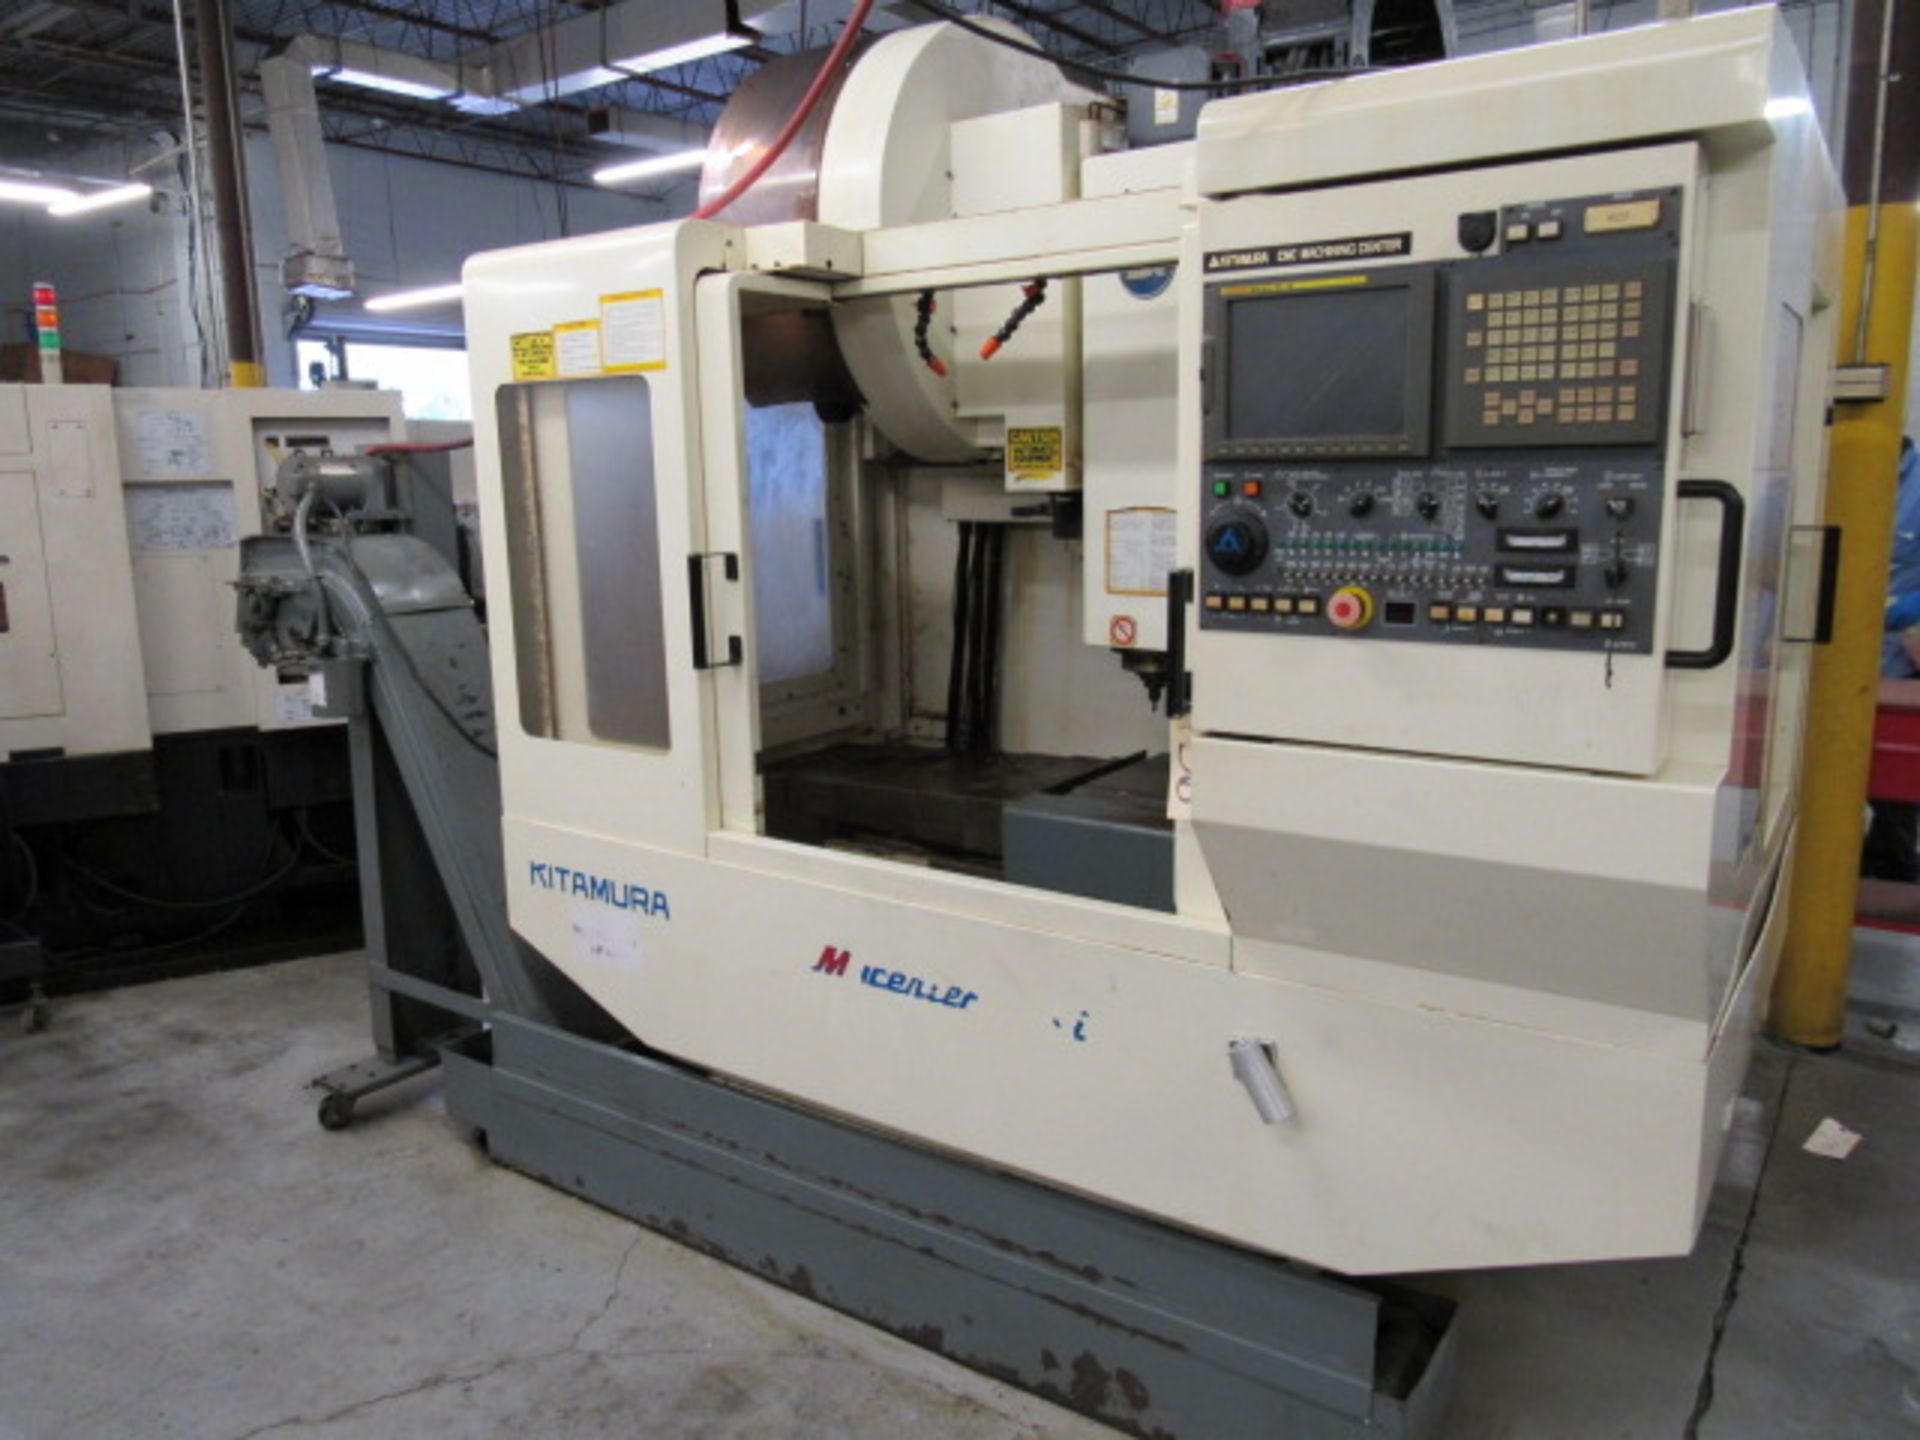 Kitamura MyCenter 3X/3Xi Wired for 4th Axis CNC Vertical Machining Center - Image 6 of 8